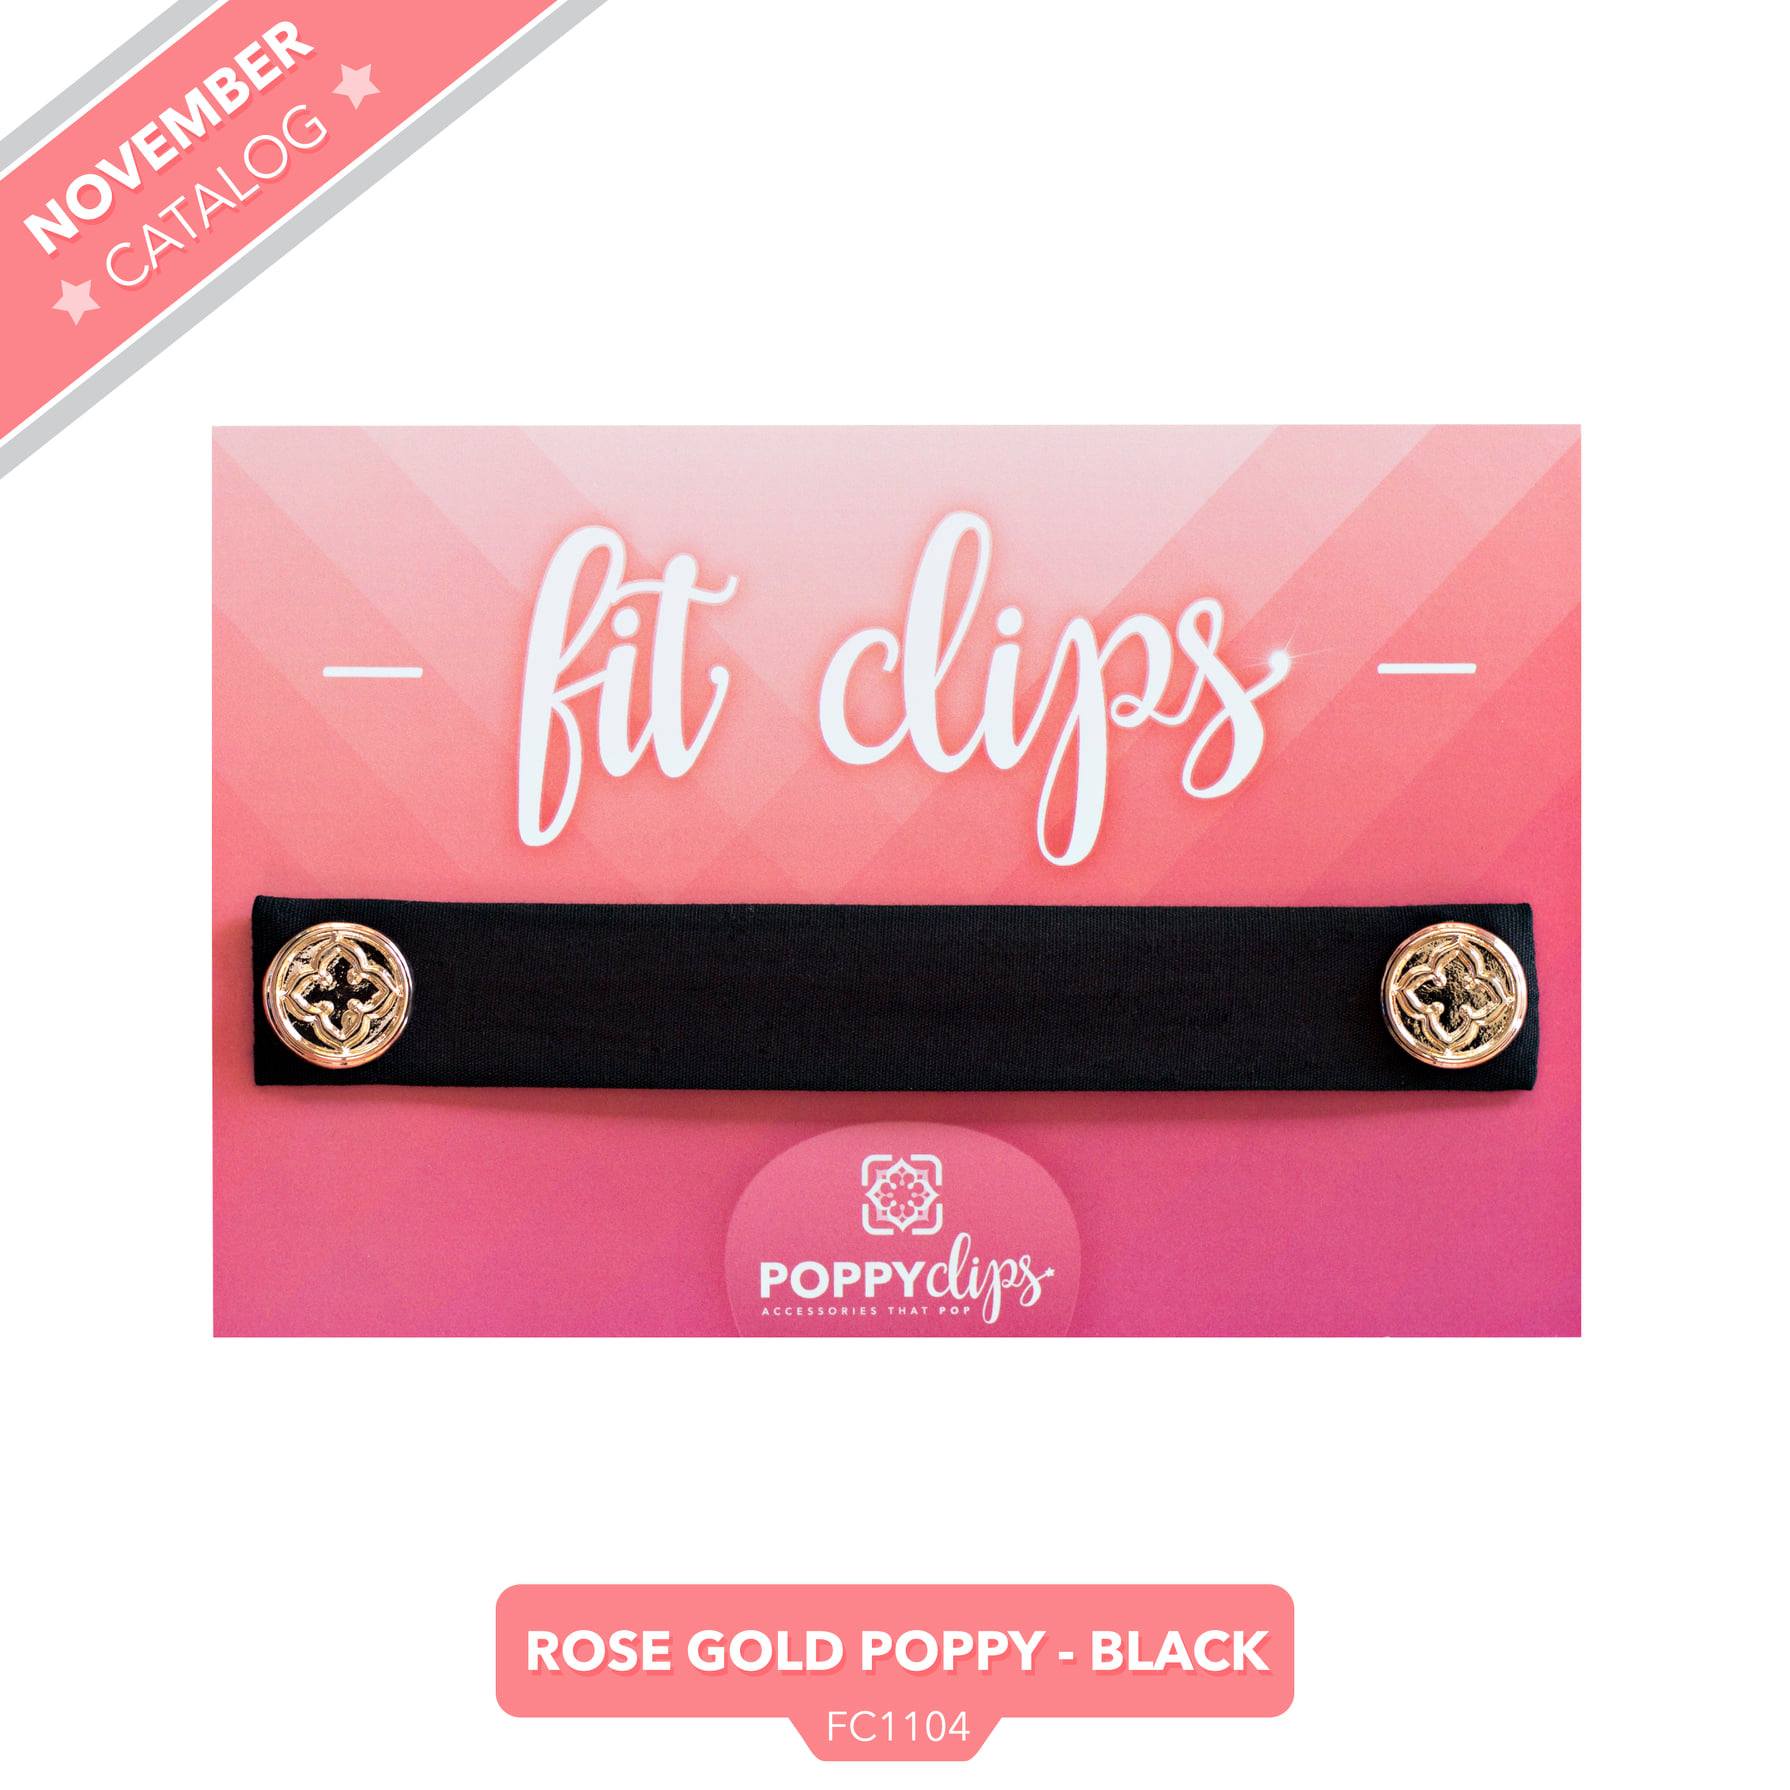 5 ¼” long by 7/8” wide black material with magnets at each end.  The outer magnets are a decorative rose gold medallion with the company logo. 